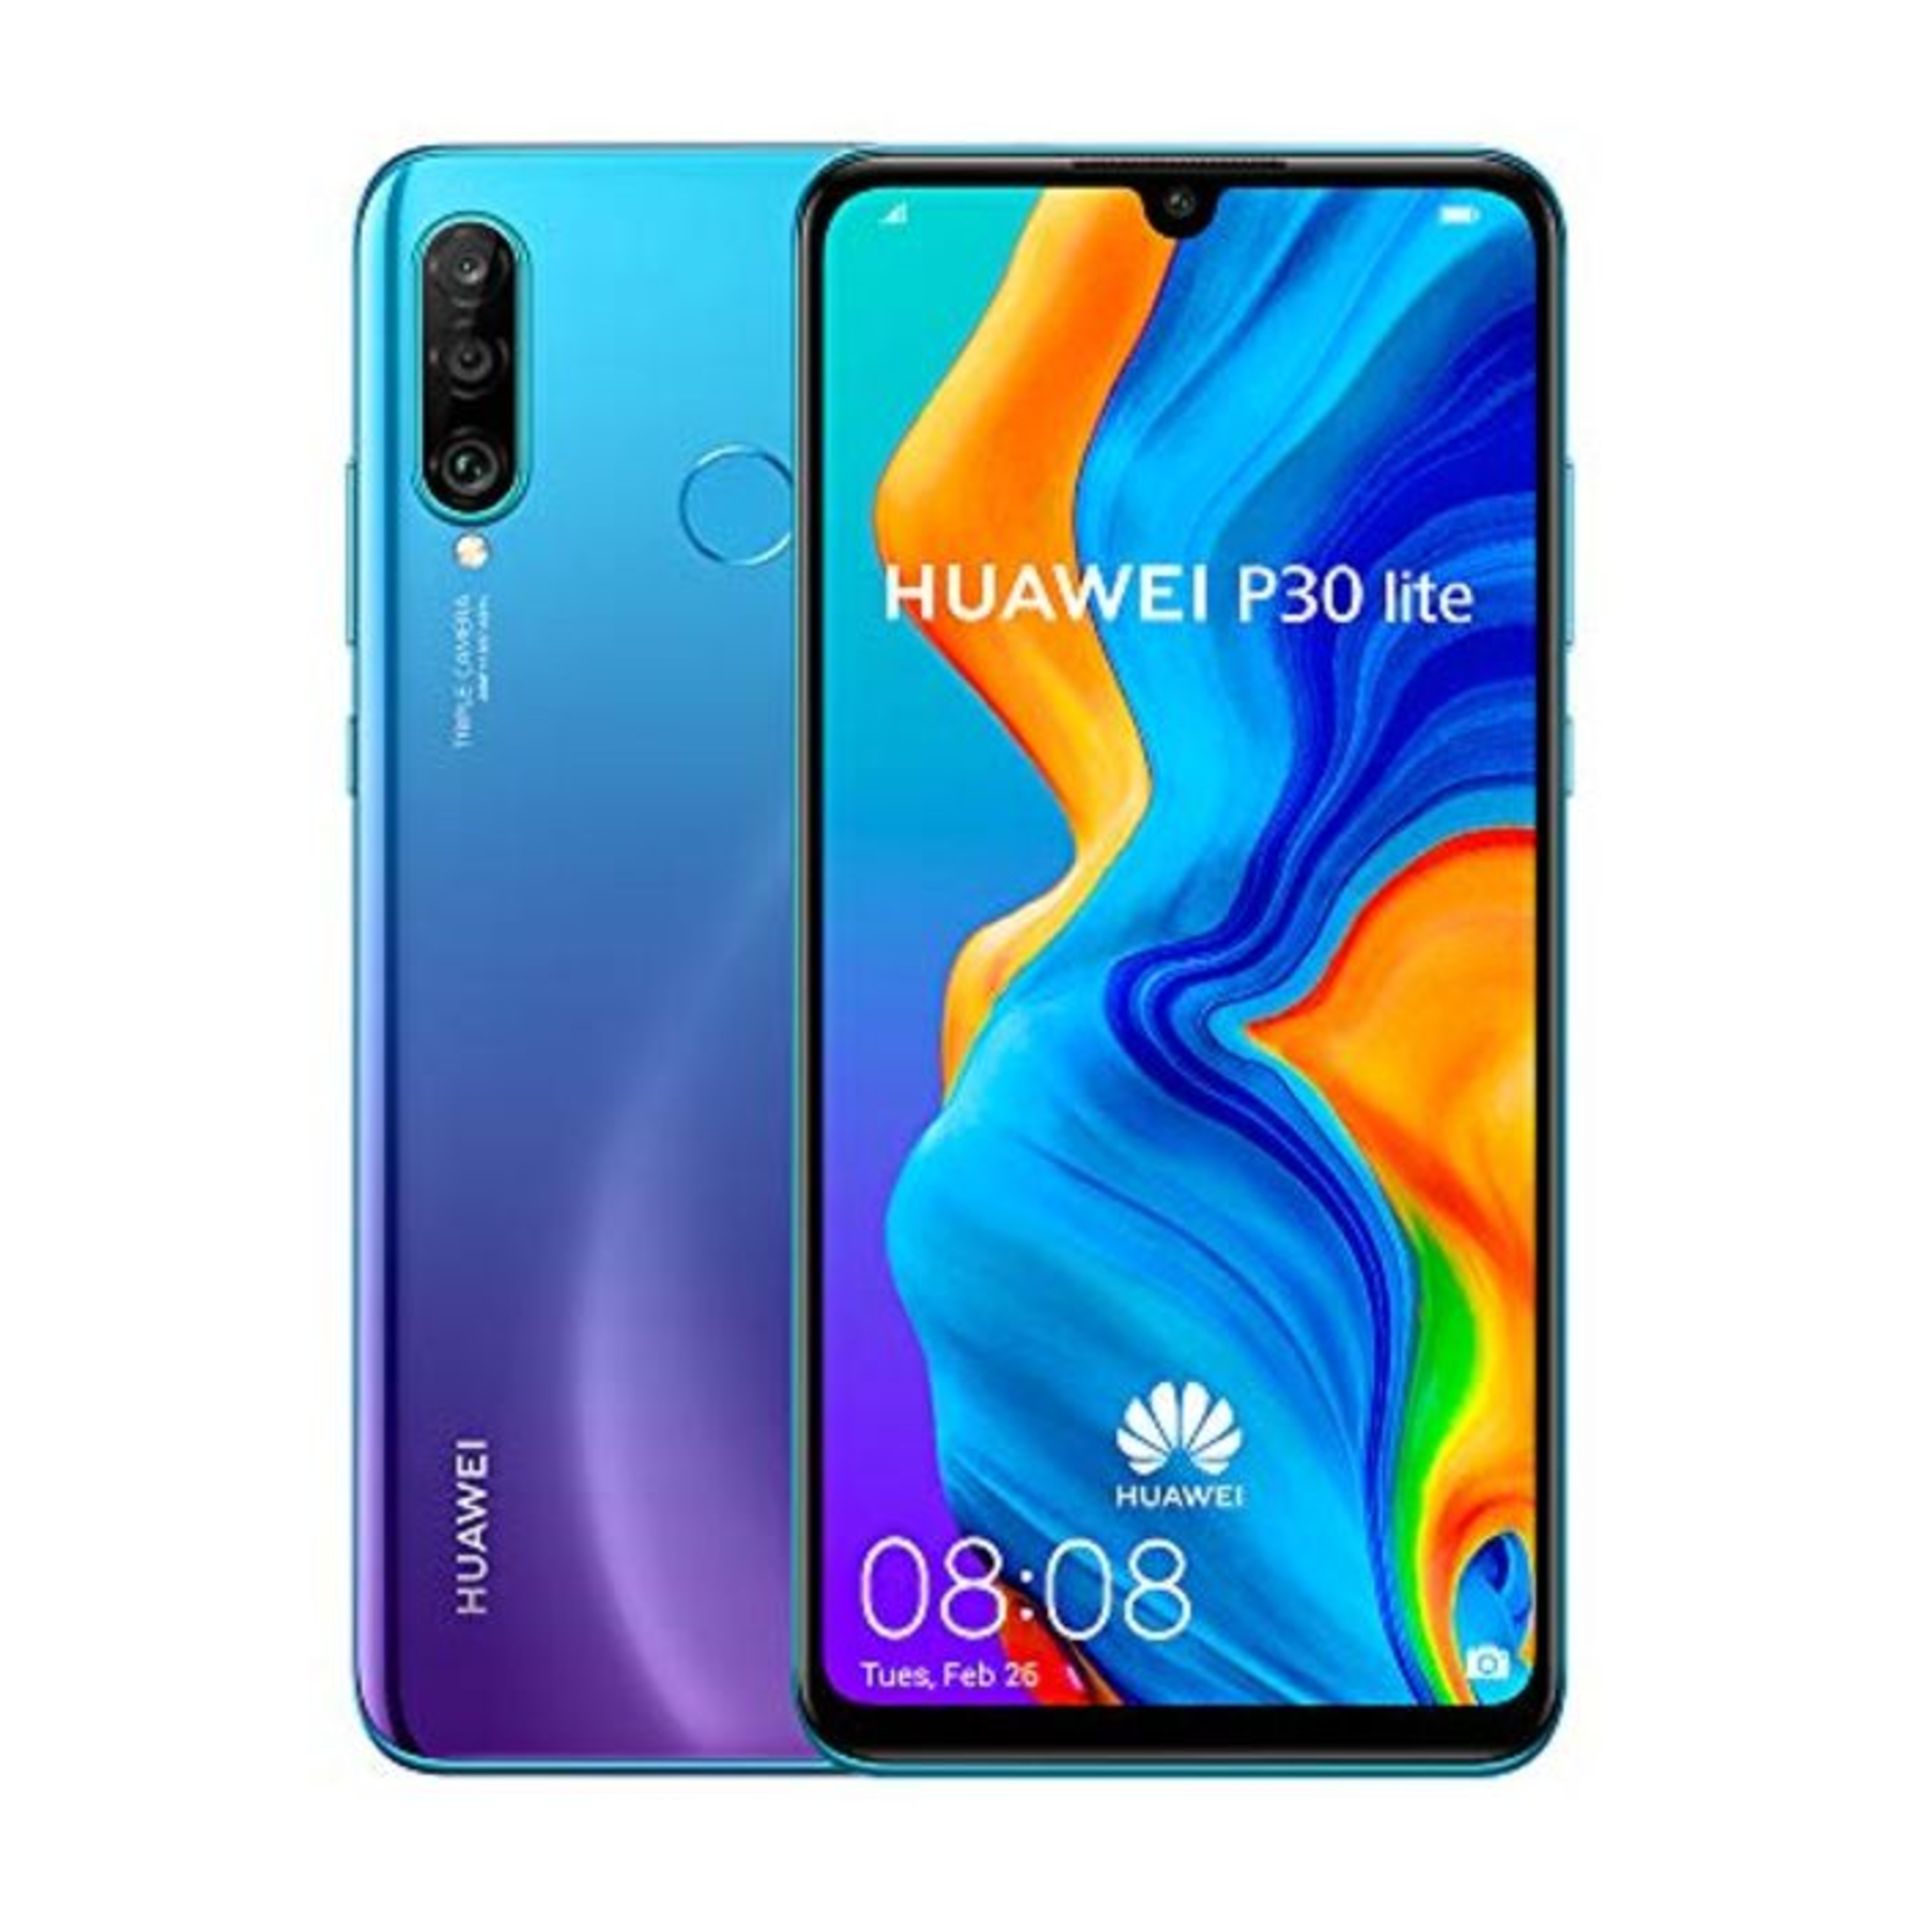 RRP £289.00 Huawei P30 Lite 128 GB 6.15 inch FHD Dewdrop Display Smartphone with MP AI Ultra-wide